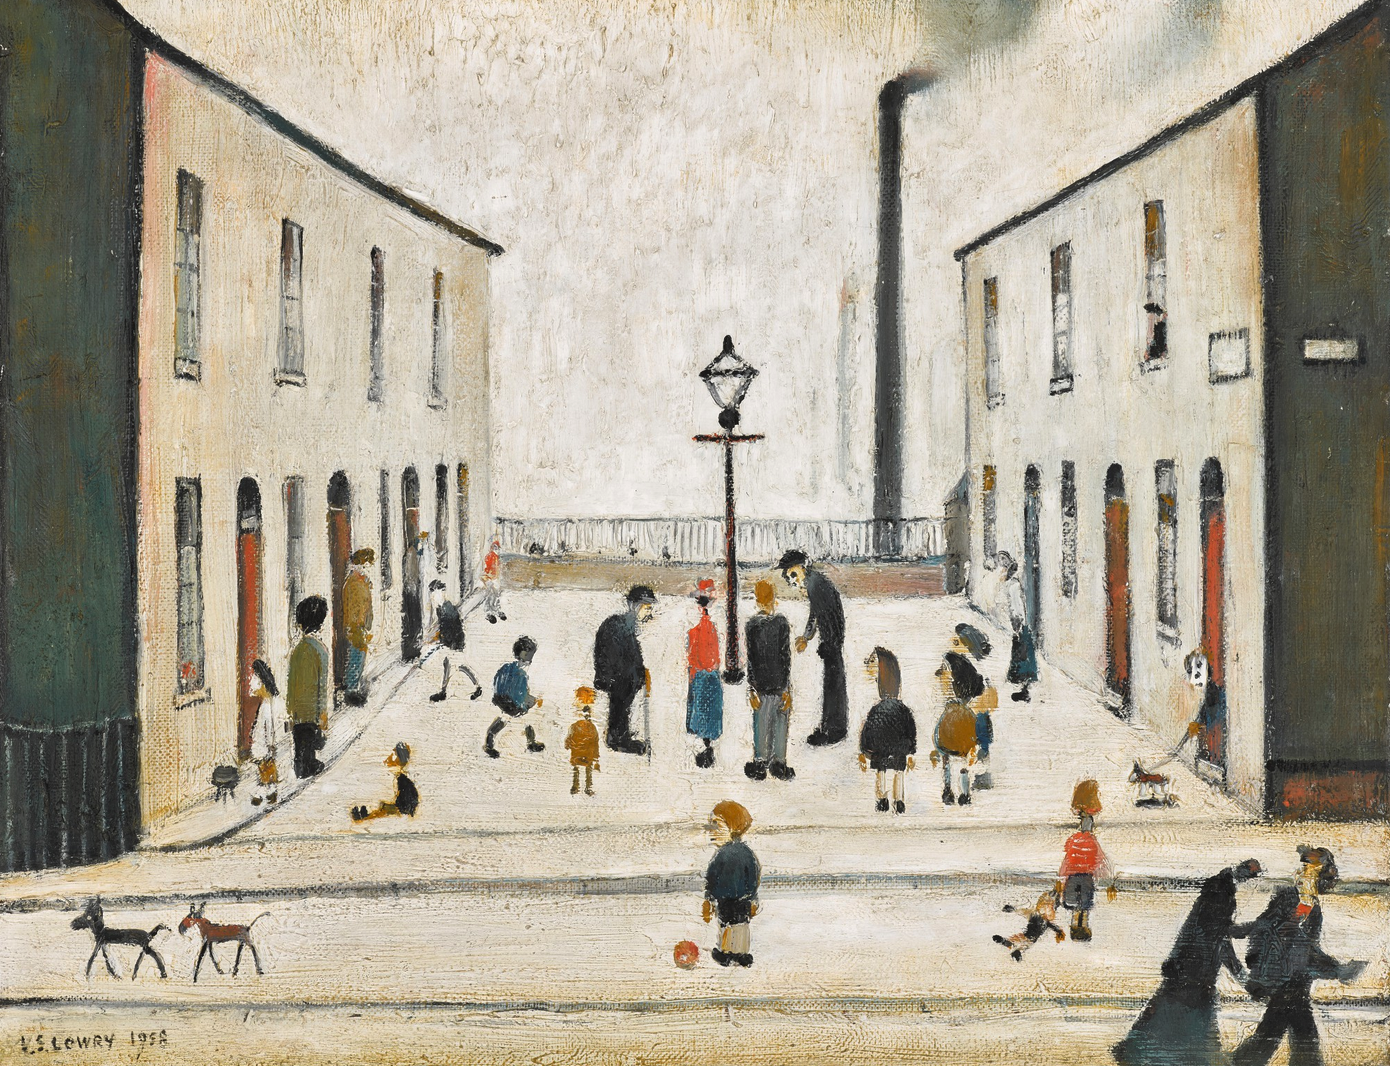 Street in Salford (1958) by Laurence Stephen Lowry (1887 - 1976), English artist.